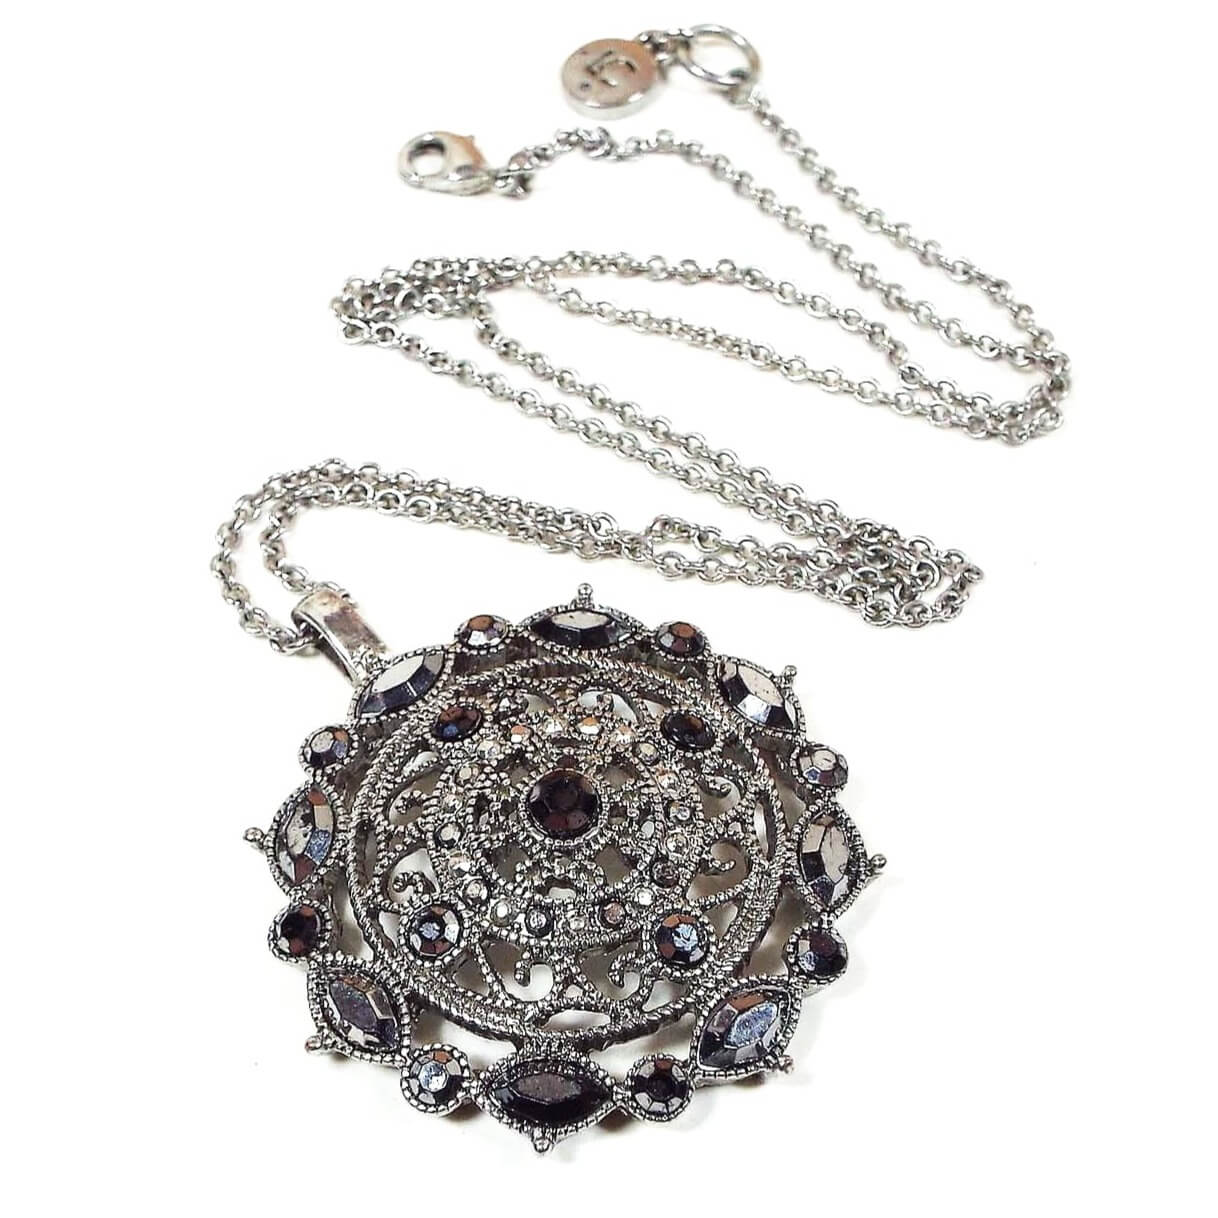 Front view of the retro vintage Liz Claiborne pendant necklace. The chain is silver tone in color. The pendant is antiqued silver tone in color with a round filigree design and various sizes and shapes of metallic gray faux marcasite rhinestones. There is a lobster claw clasp at the end and a hang tag with LC on it.